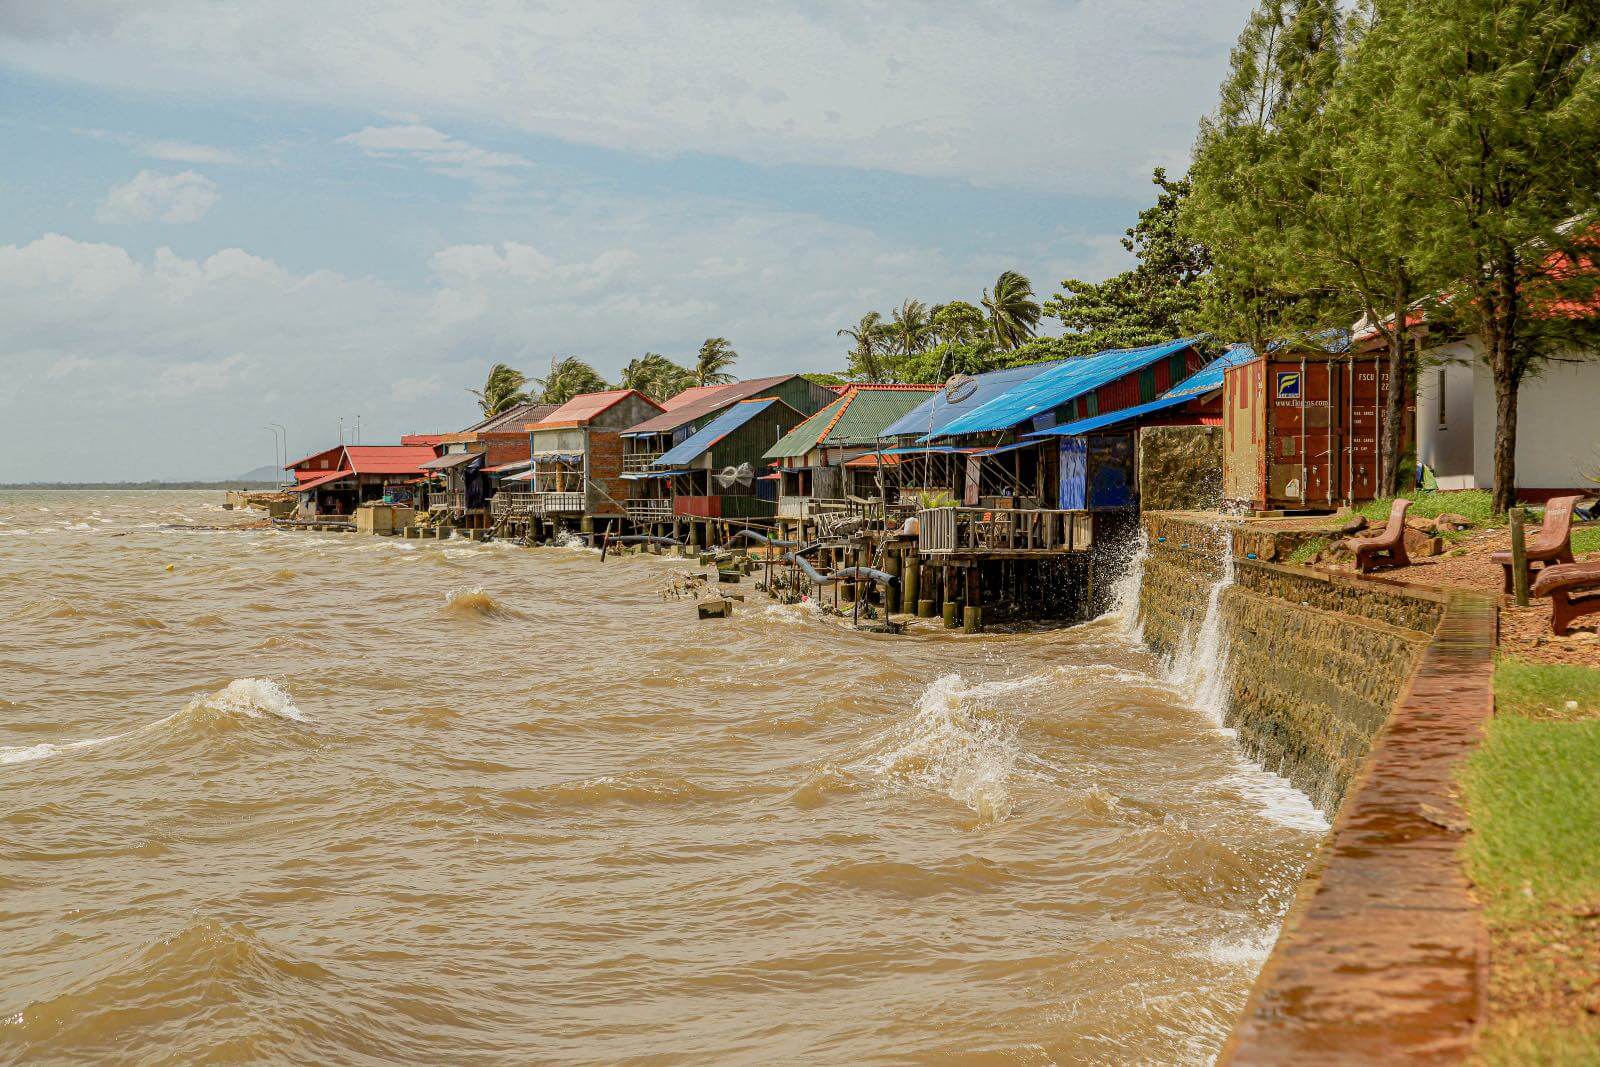 View of the town of Kep, Cambodia on the river